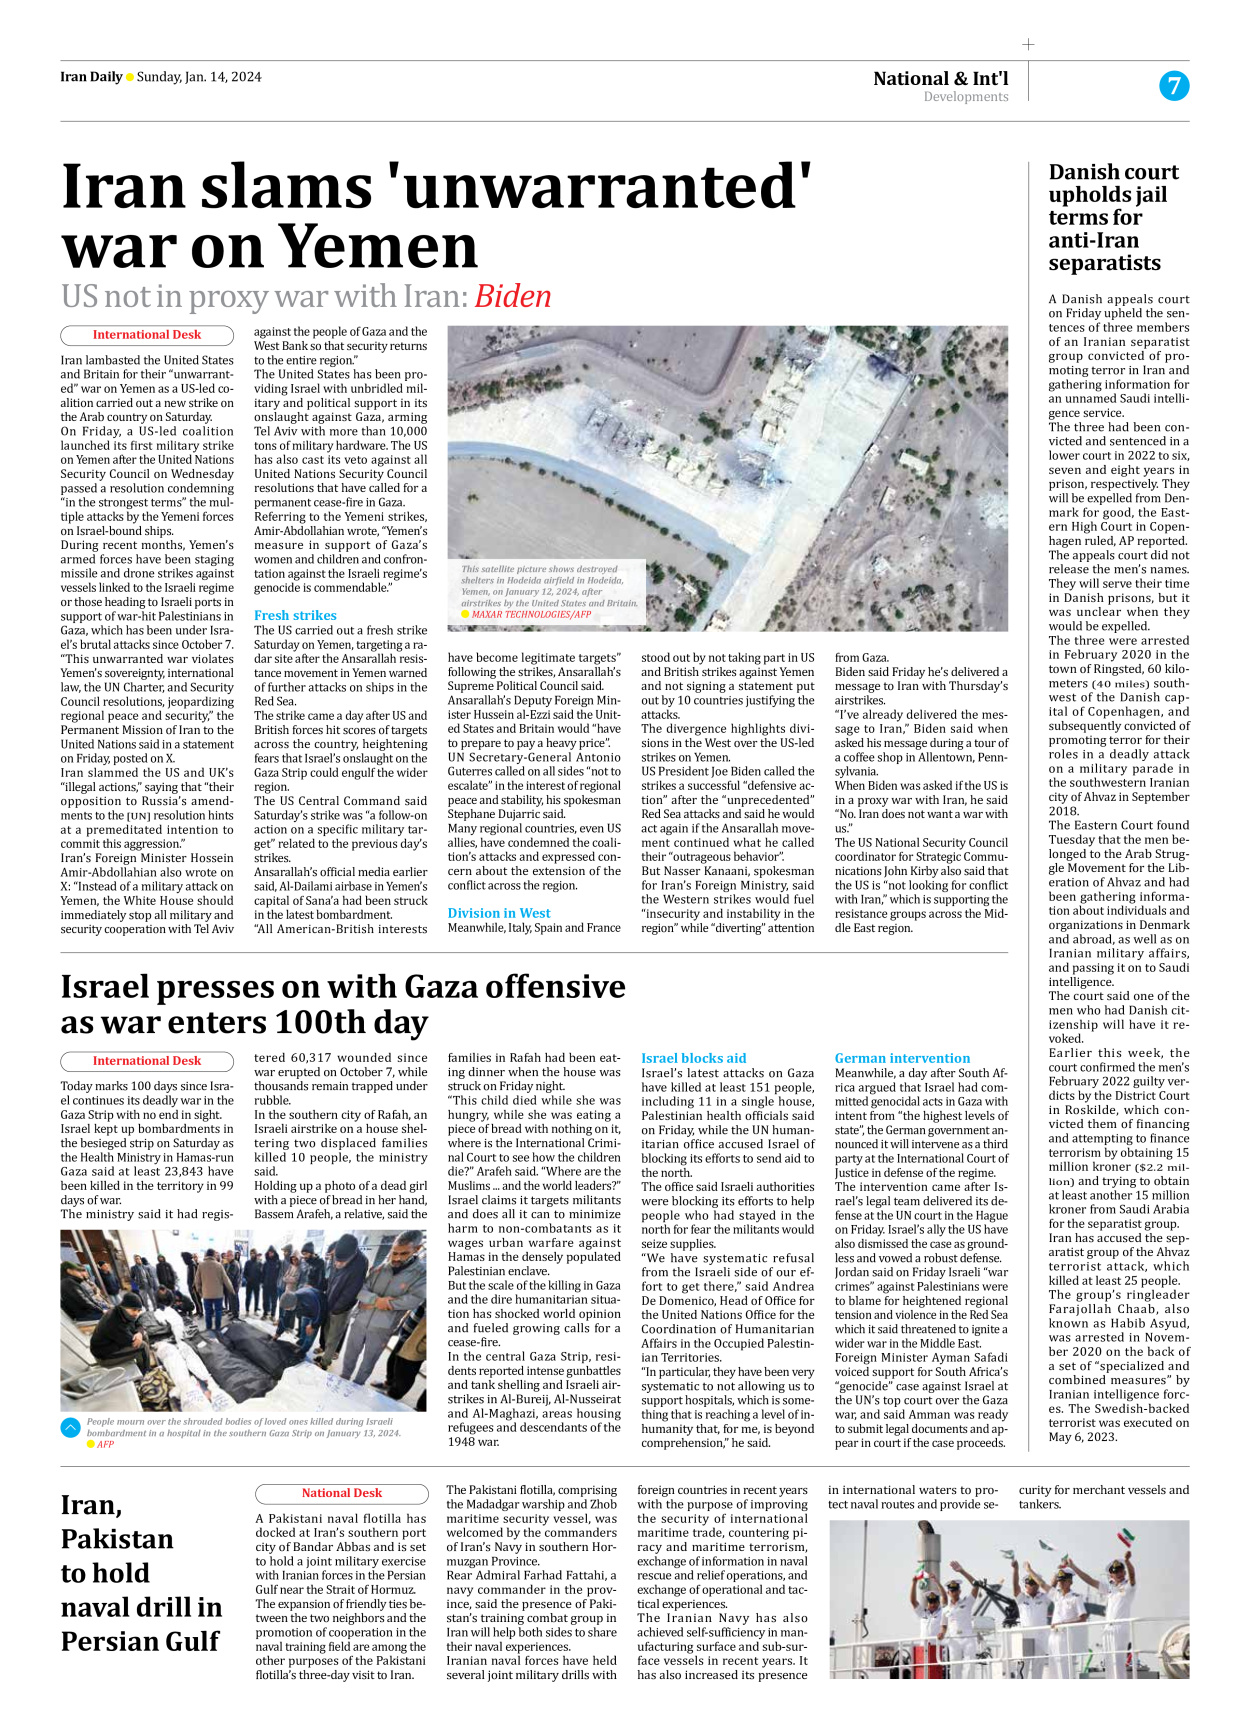 Iran Daily - Number Seven Thousand Four Hundred and Eighty Four - 14 January 2024 - Page 7